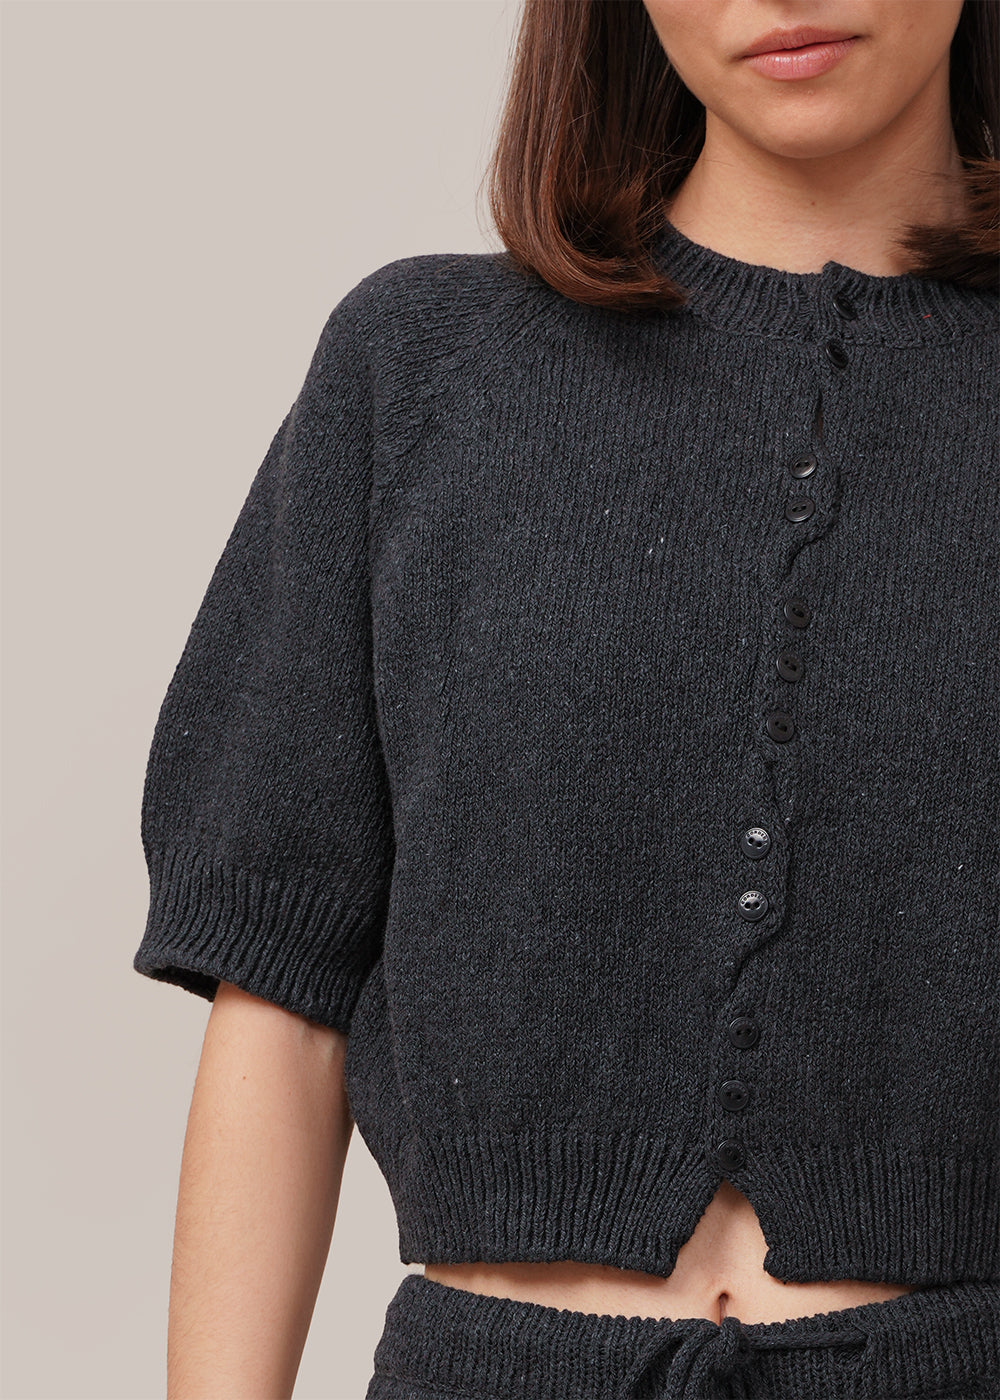 Charcoal Heather Cotton Top